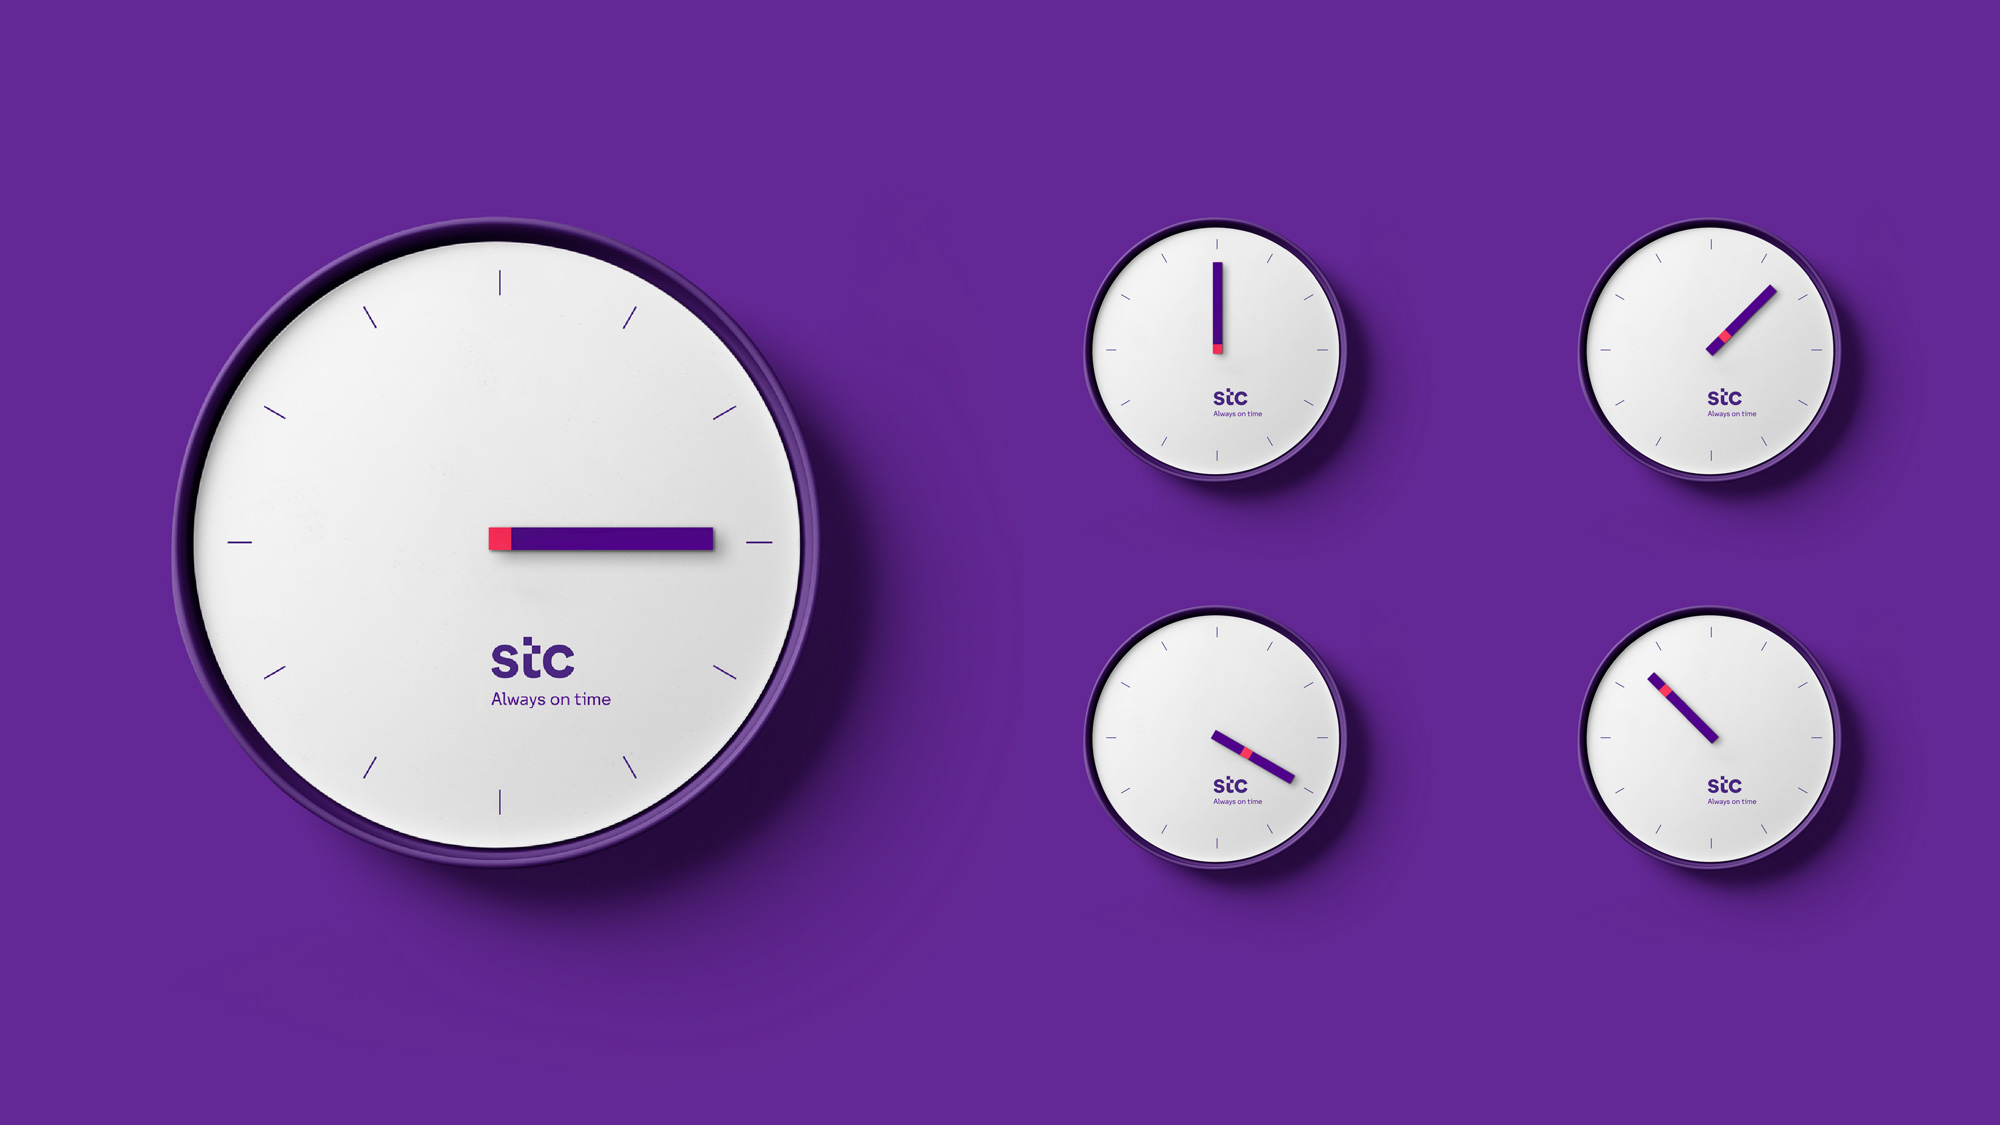 New Logo and Identity for STC by Interbrand